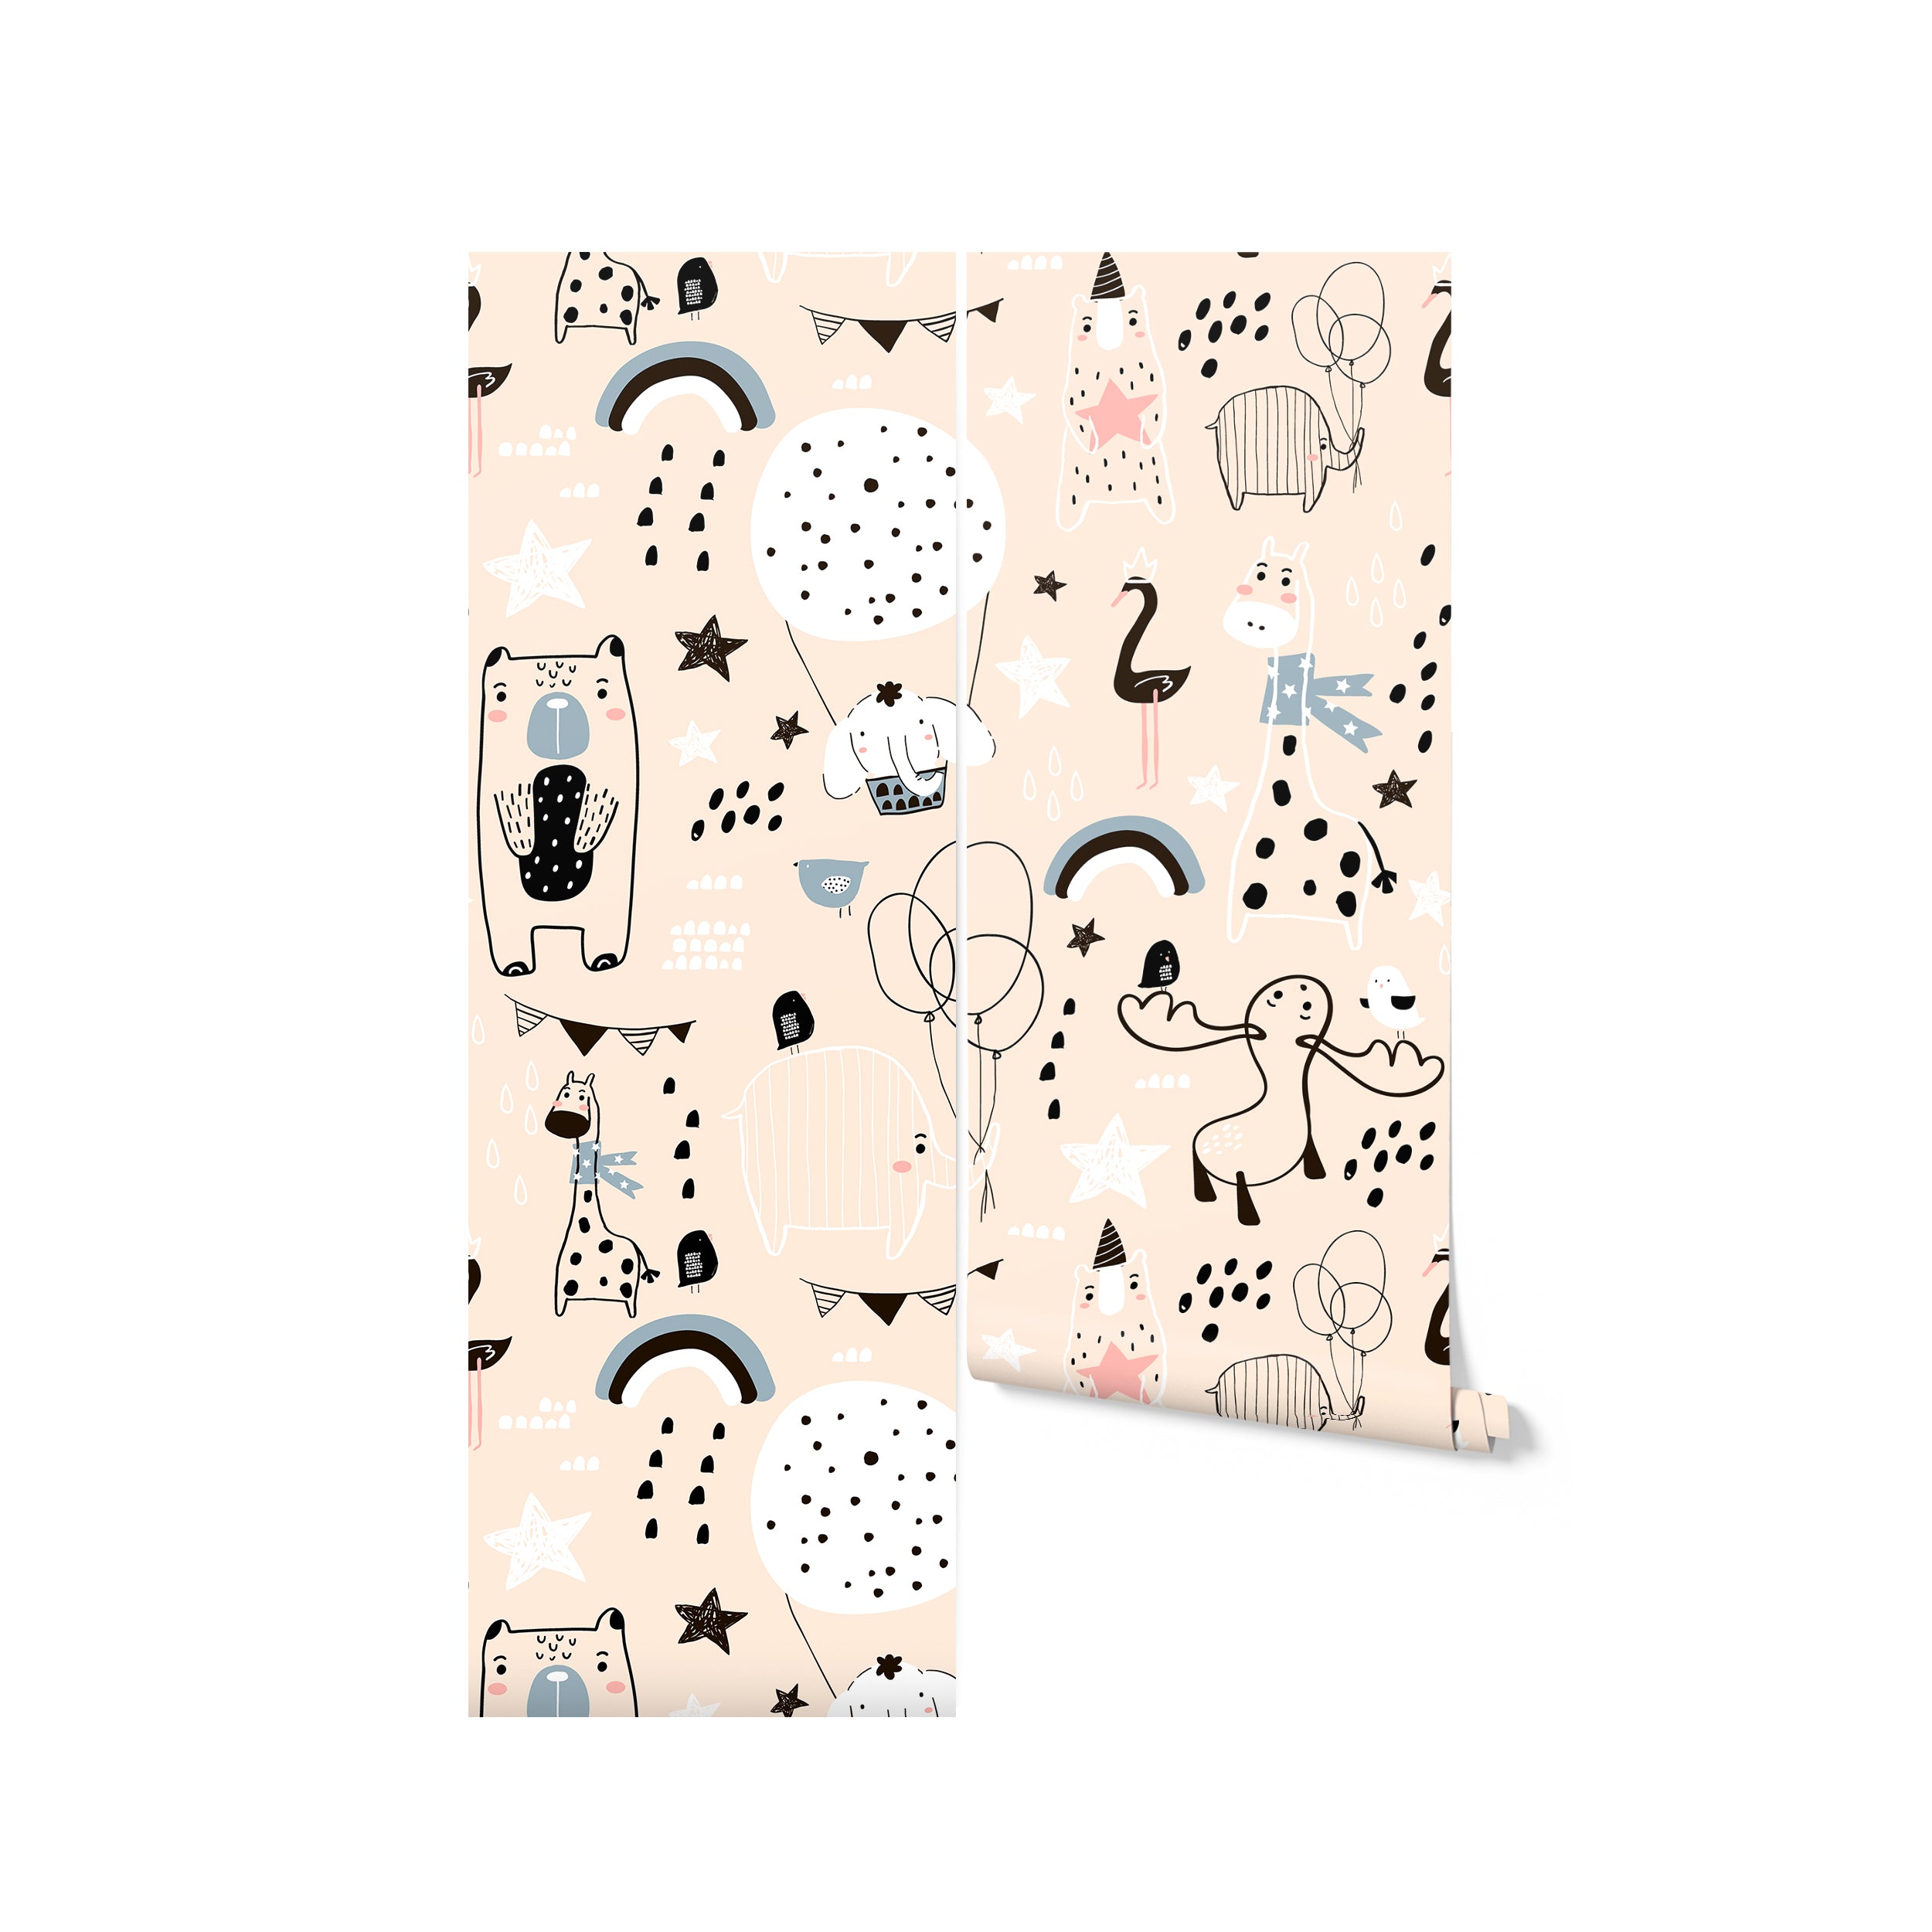 Single panel of Timberlea Interiors kids wallpaper featuring cute and quirky animal doodles on a beige background, perfect for creative nursery or playroom walls."